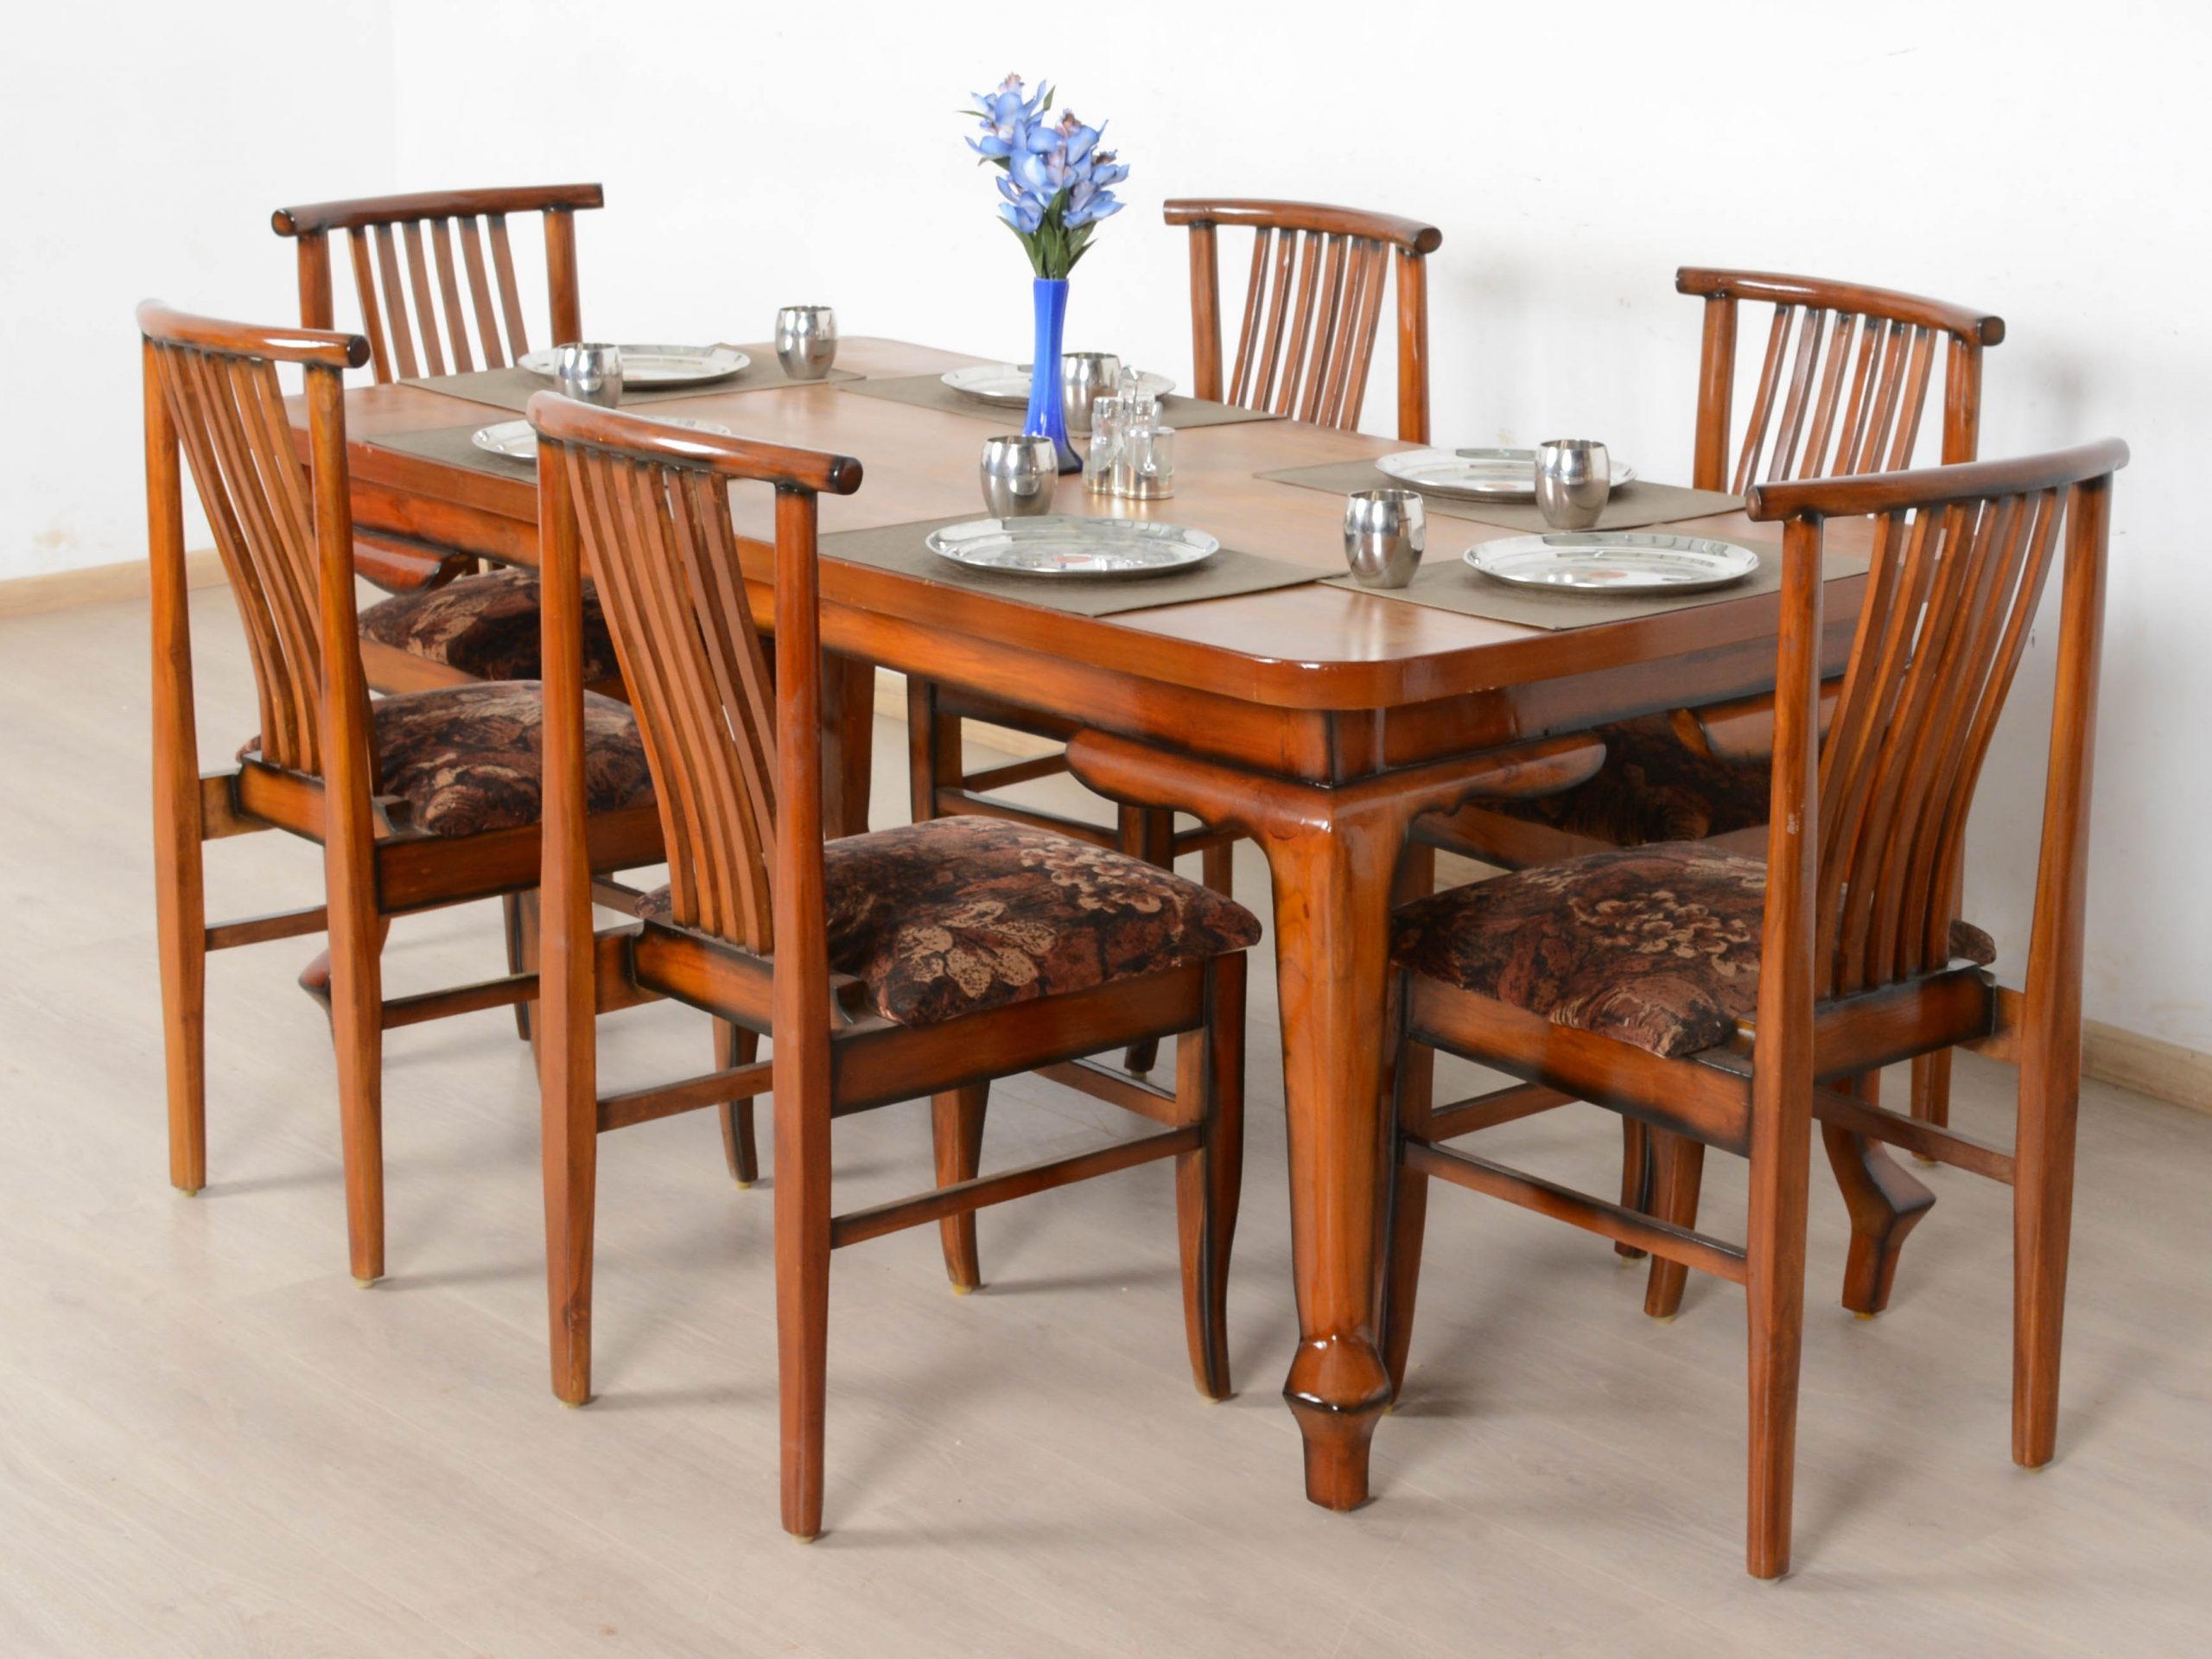 Second Hand Dining Room Table And 6 Chairs